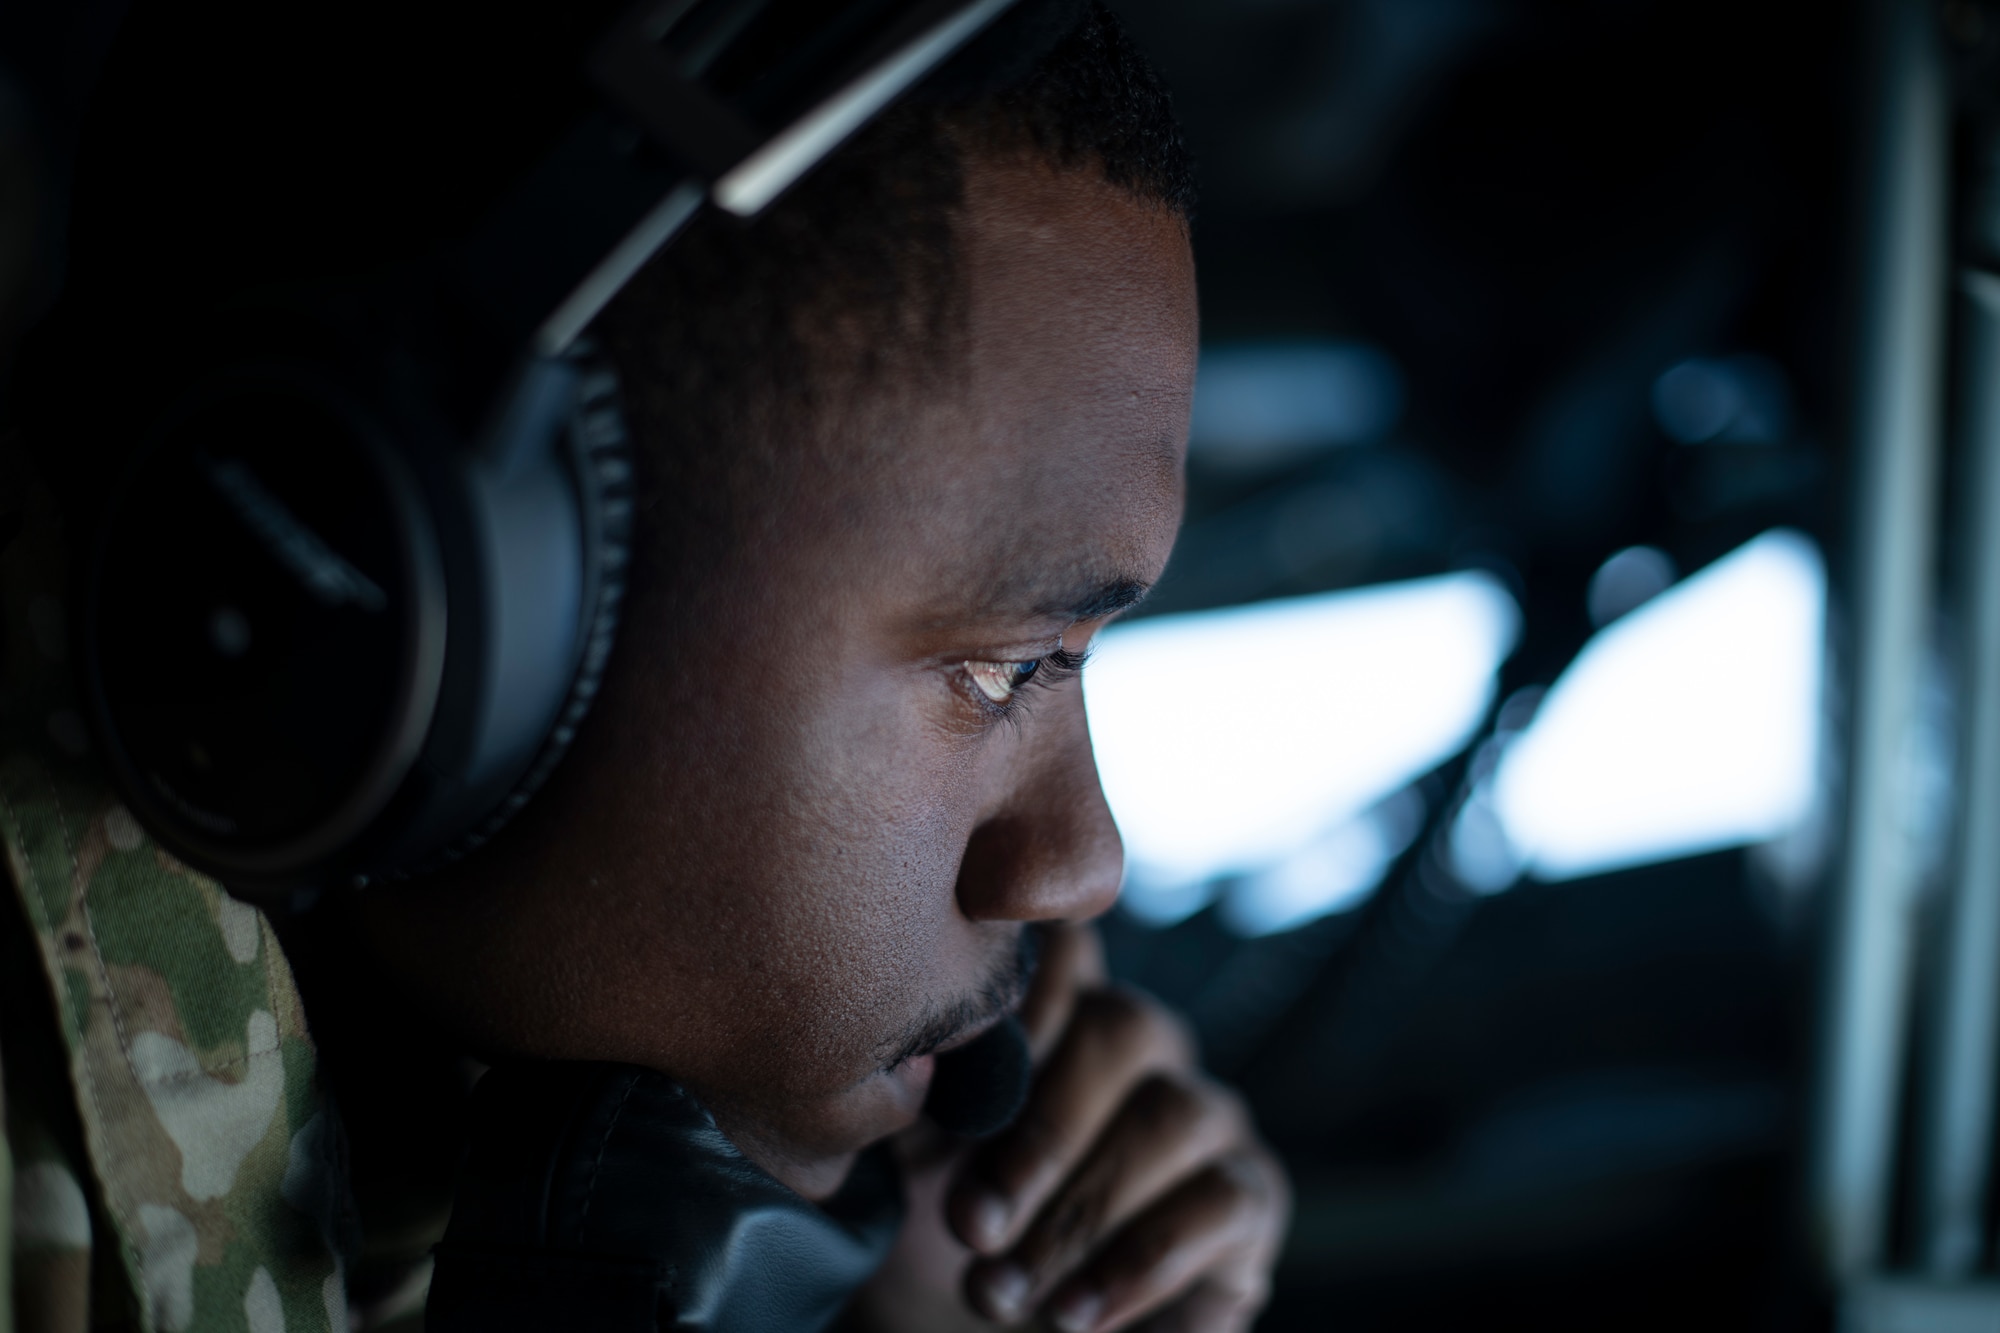 U.S. Air Force Staff Sgt. Kalif Richardson, 909th Air Refueling Squadron in-flight refueling specialist, communicates with the receiving aircraft during aerial refueling over the Pacific Ocean Oct. 14, 2021. Also known as boom operators, in-flight refueling specialists transfer thousands of gallons of jet fuel into airborne aircraft. (U.S. Air Force photo by Senior Airman Jessi Monte)